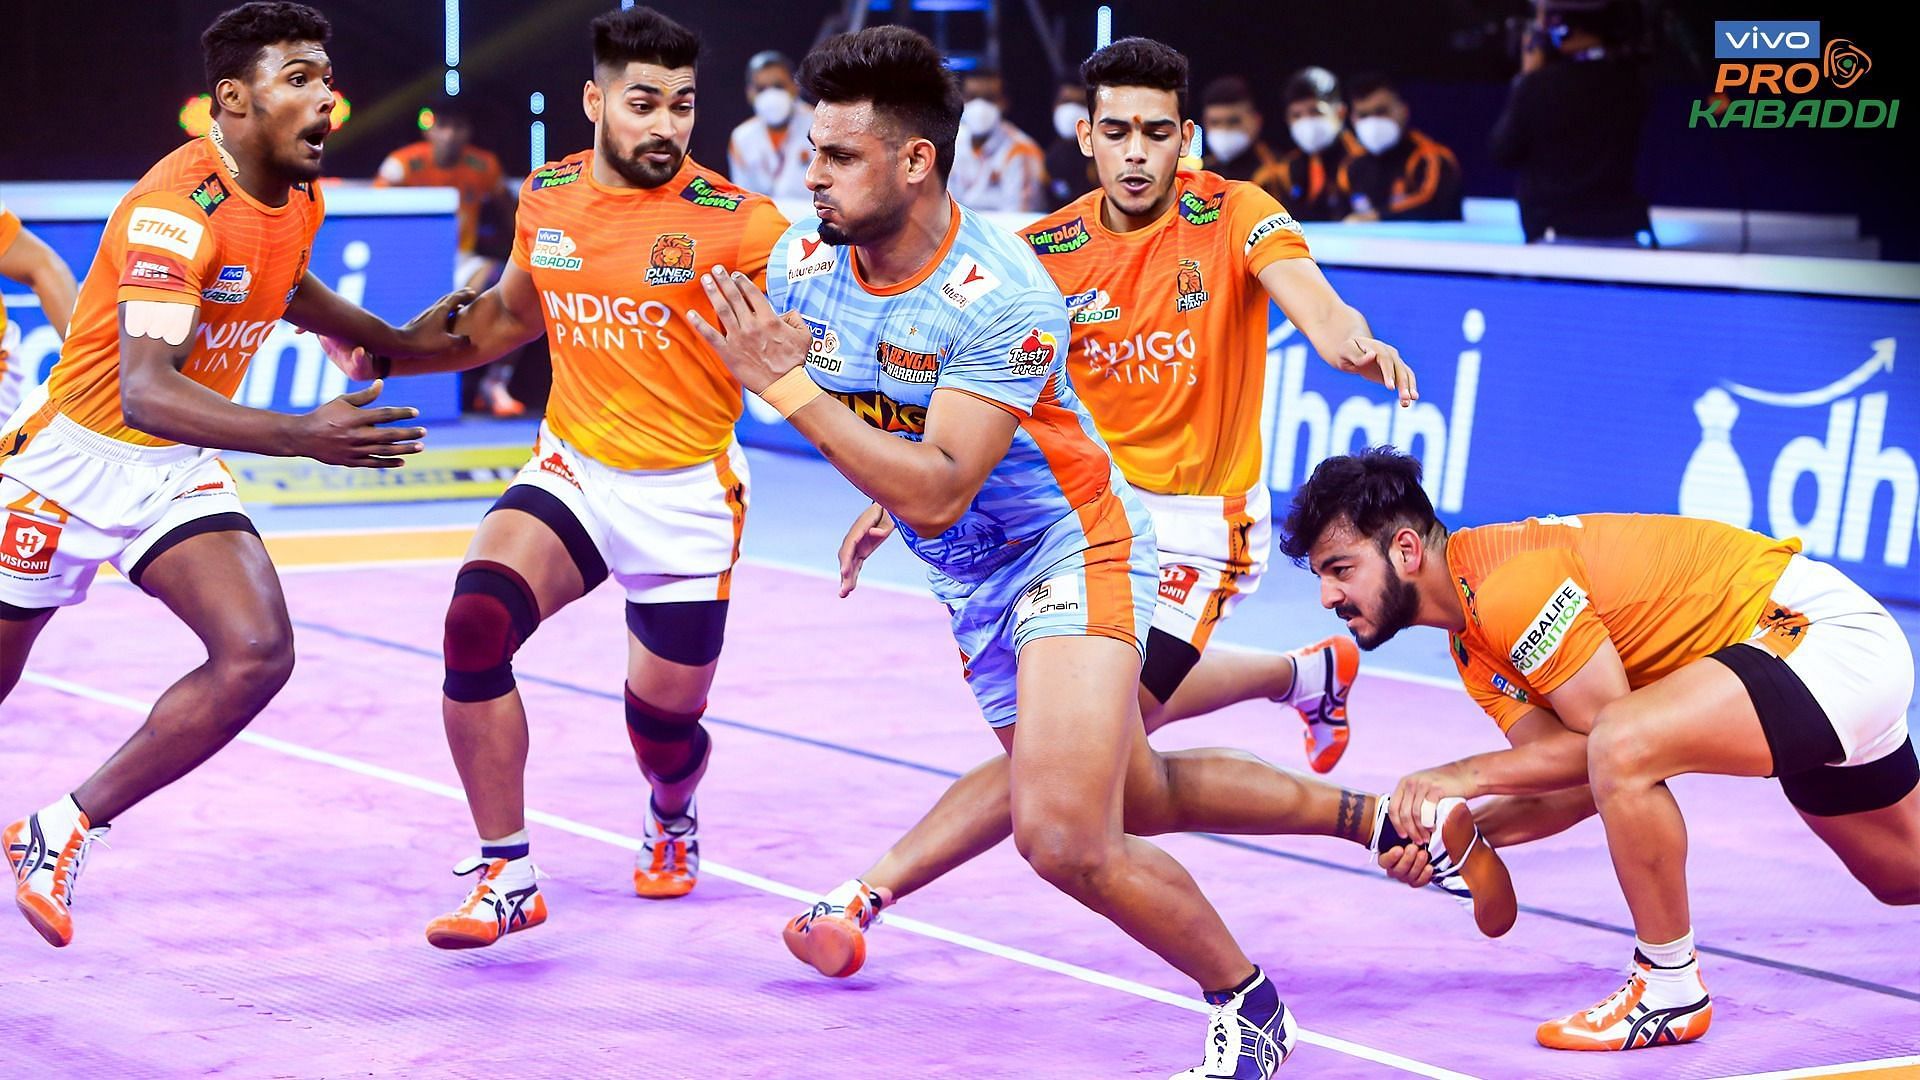 Pro Kabaddi 2022: 1 player from each eliminated team who impressed the most